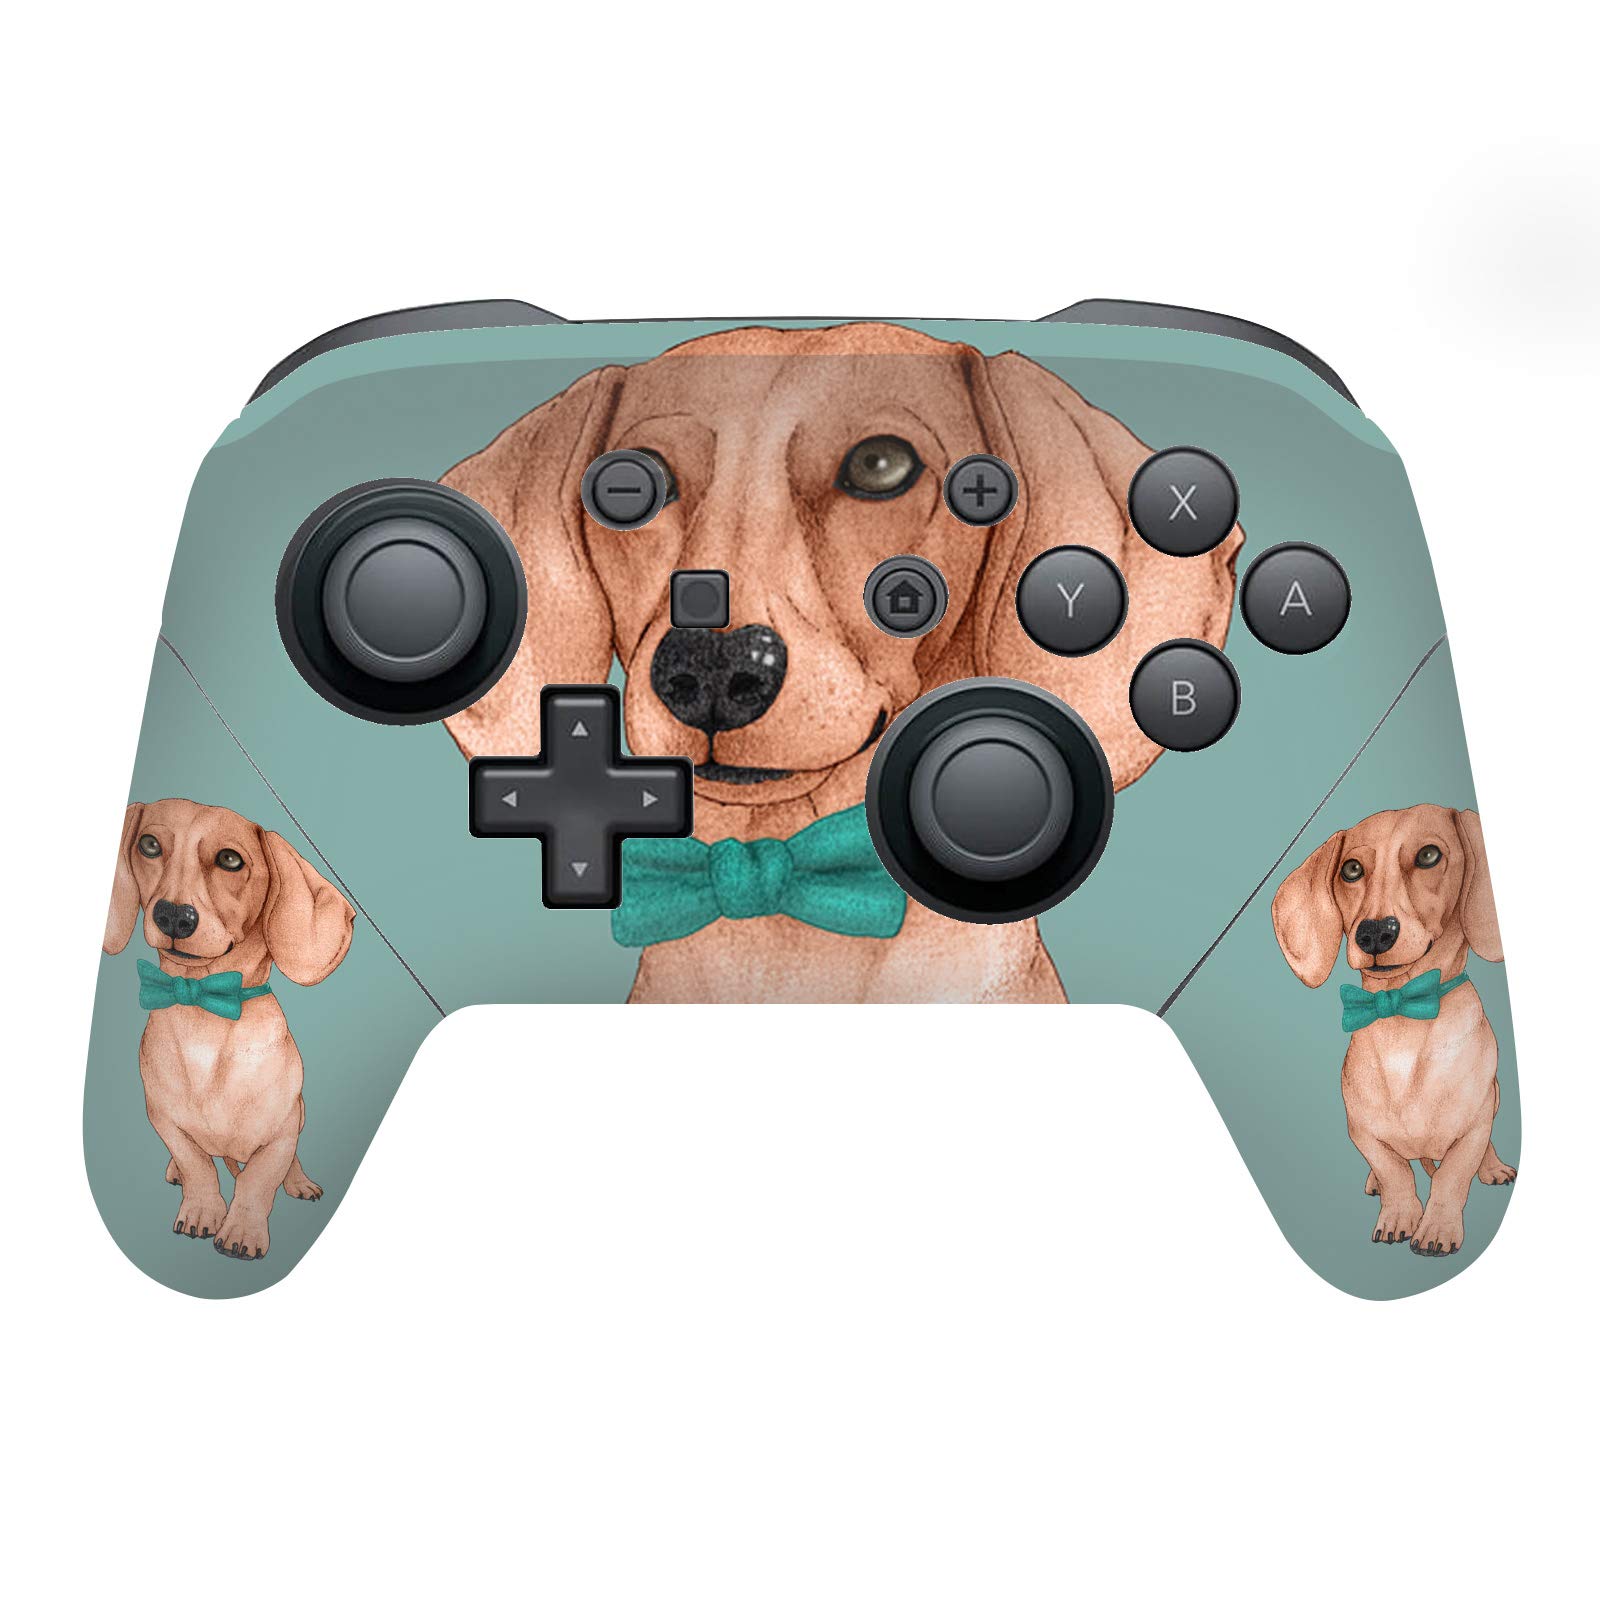 Head Case Designs Officially Licensed Barruf Dachshund, The Wiener Art Mix Vinyl Sticker Gaming Skin Decal Cover Compatible with Nintendo Switch Pro Controller